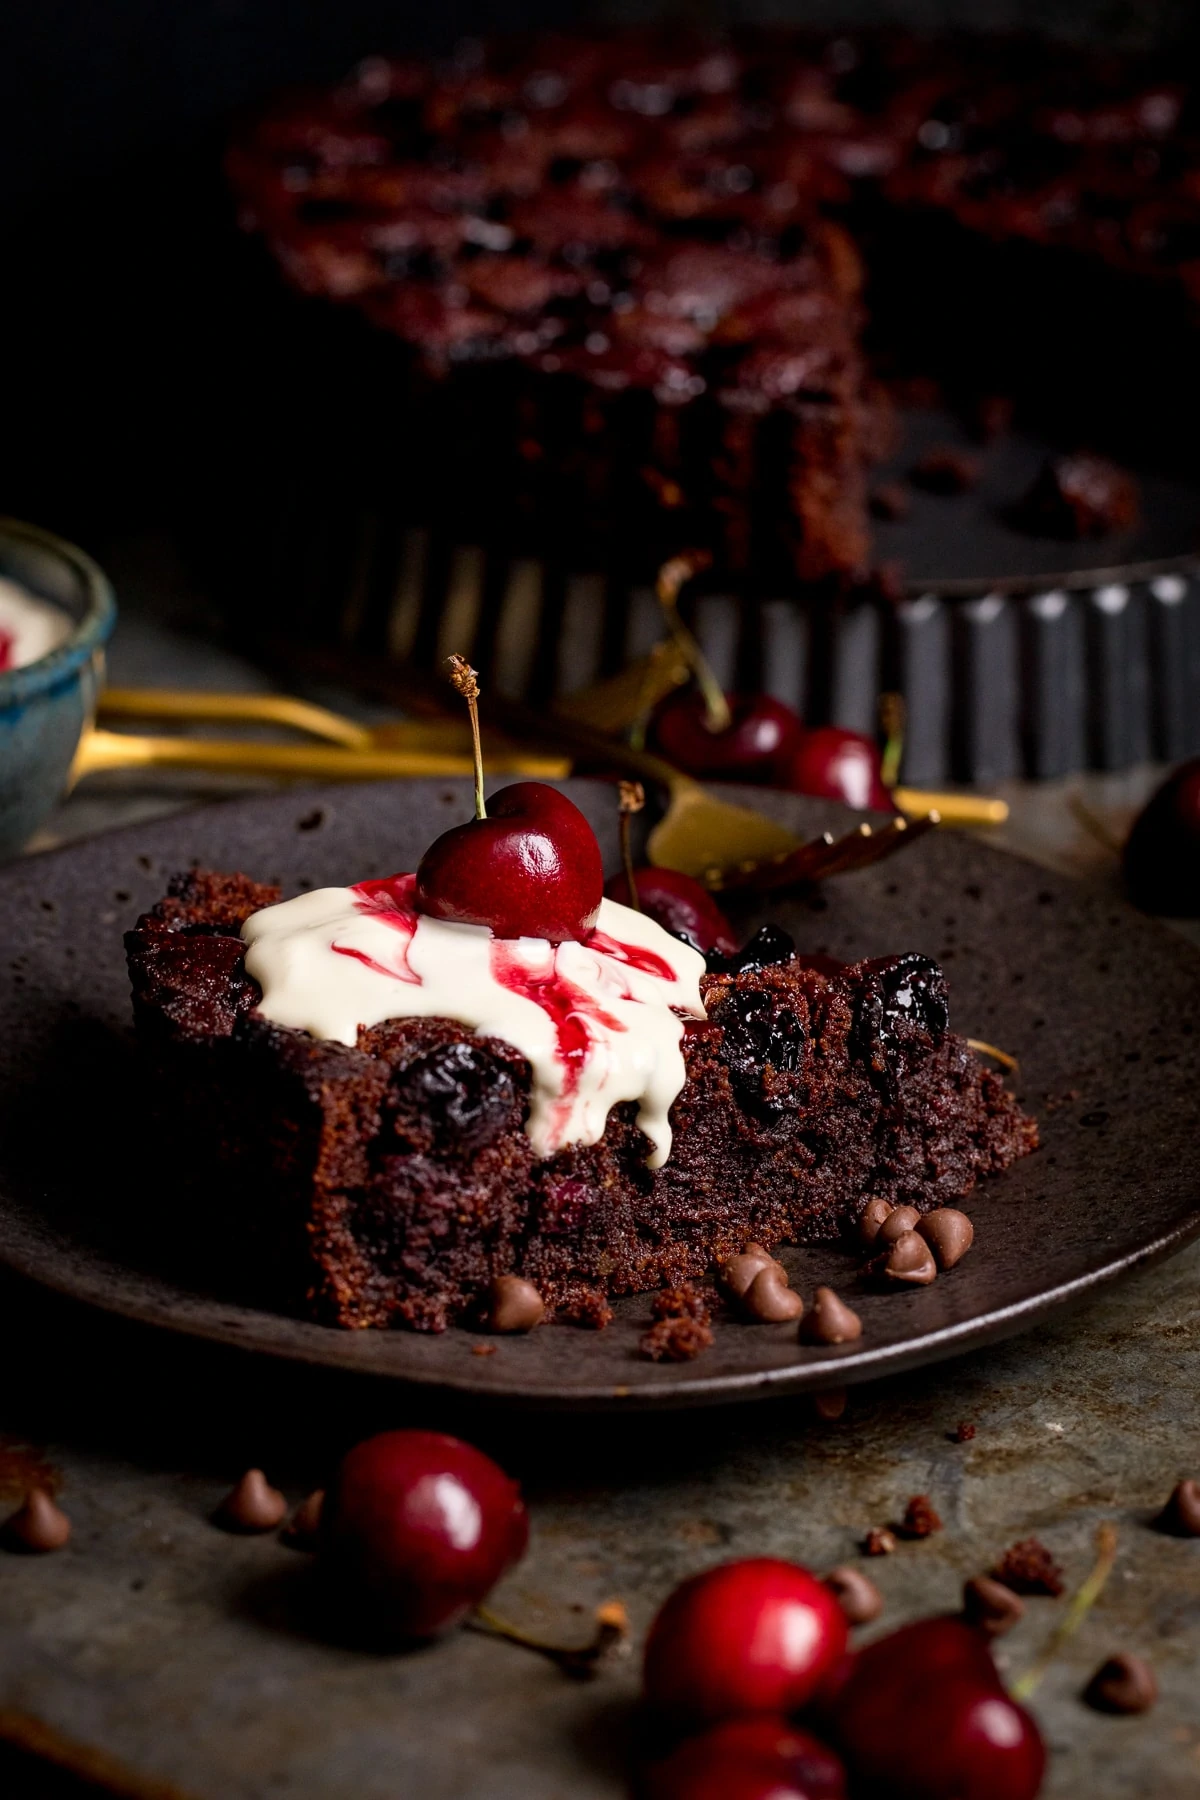 Chocolate Cherry Cake slice on a dark plate. Cherries in foreground, rest of cake in background.